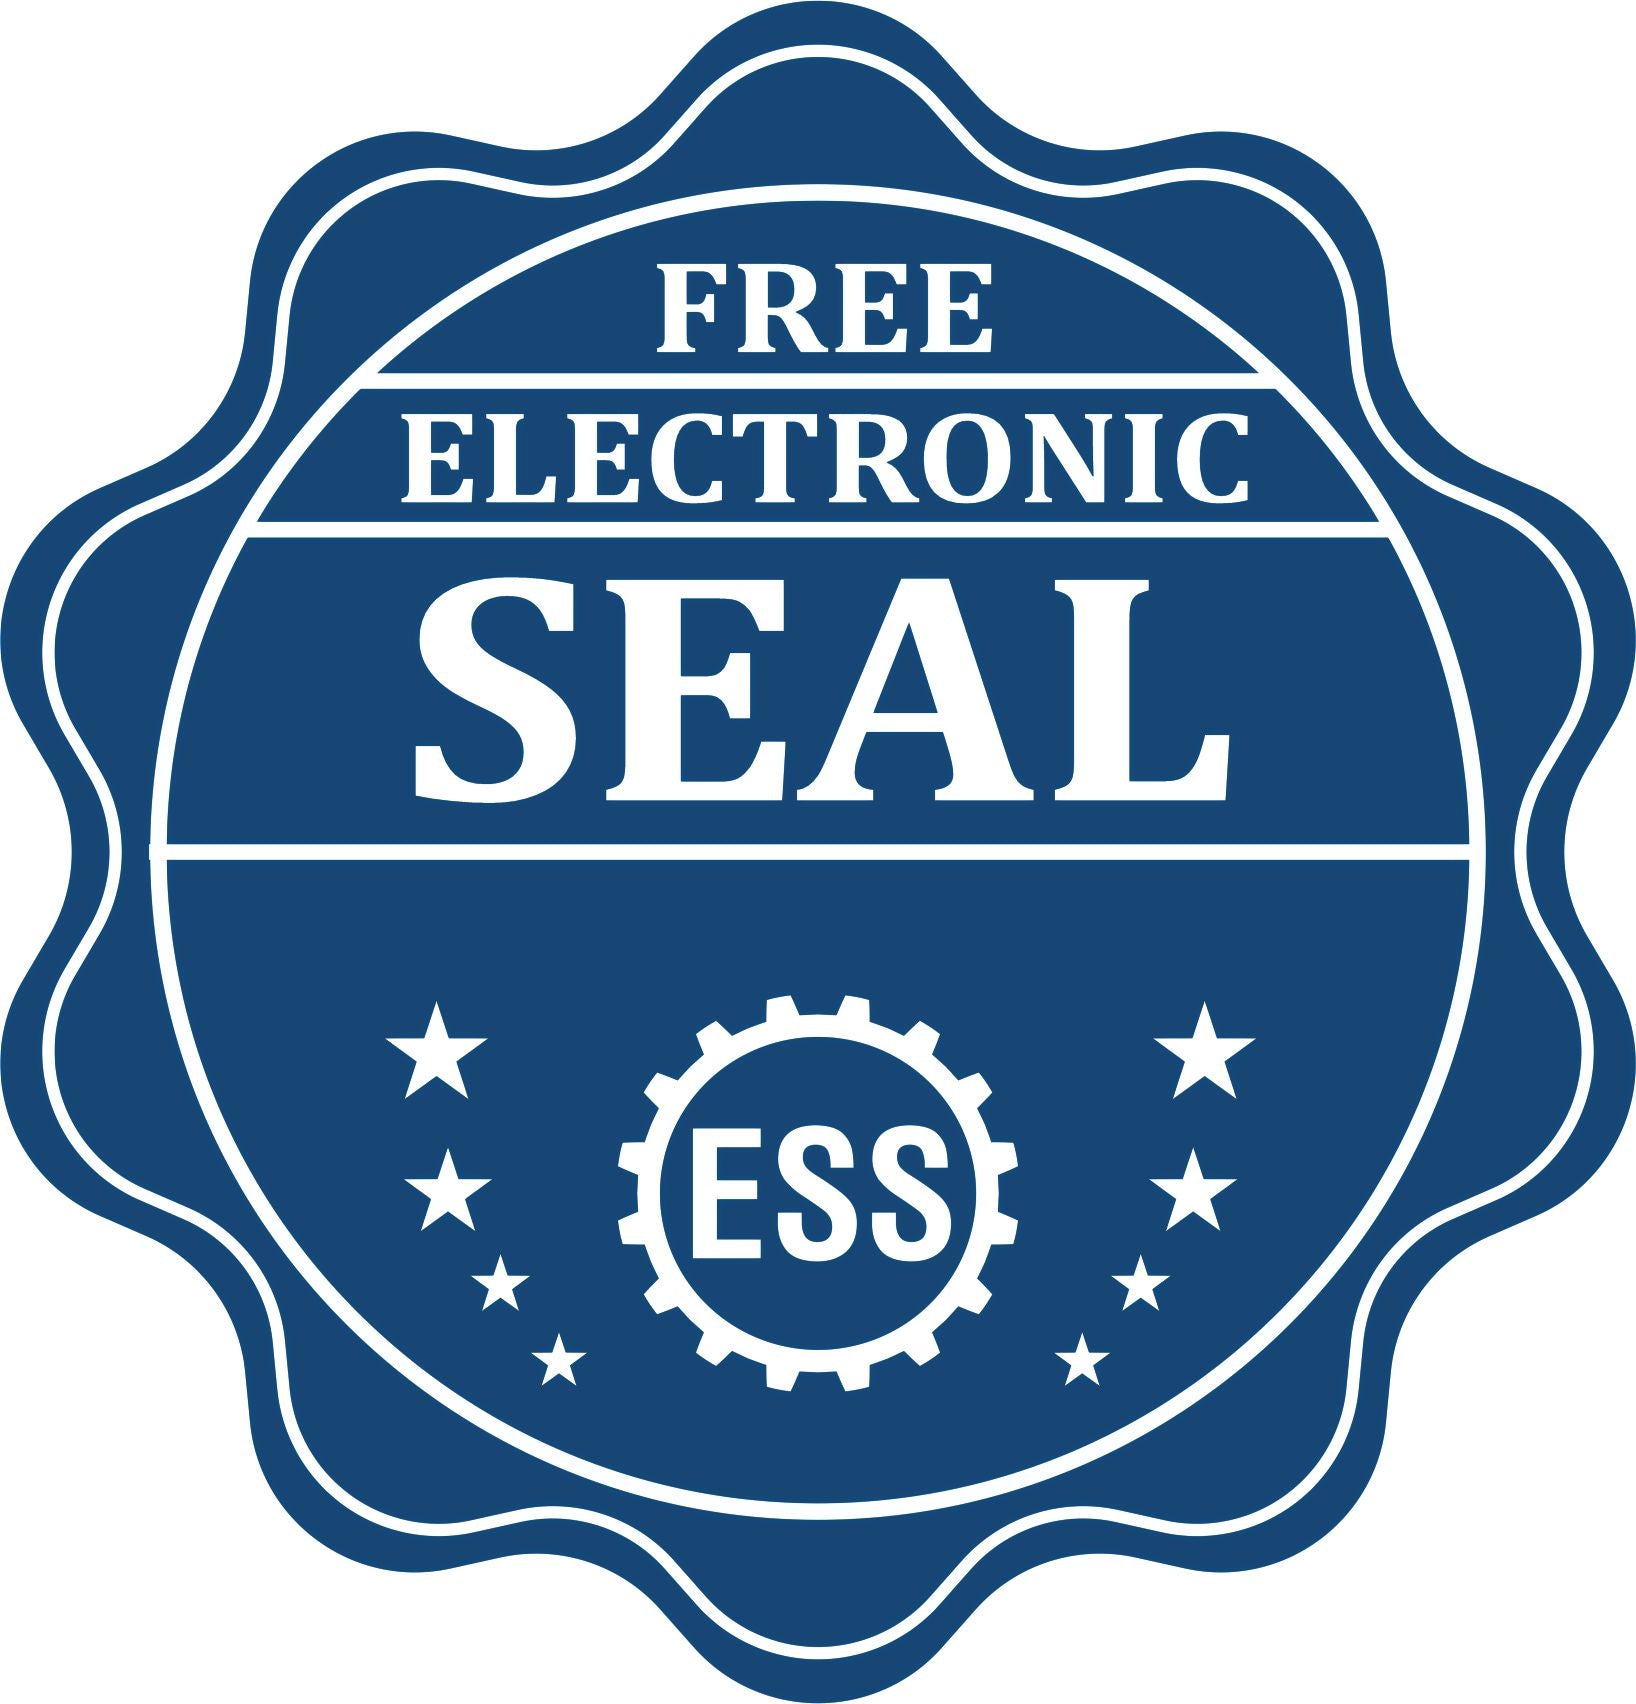 A badge showing a free electronic seal for the Slim Pre-Inked Washington Architect Seal Stamp with stars and the ESS gear on the emblem.